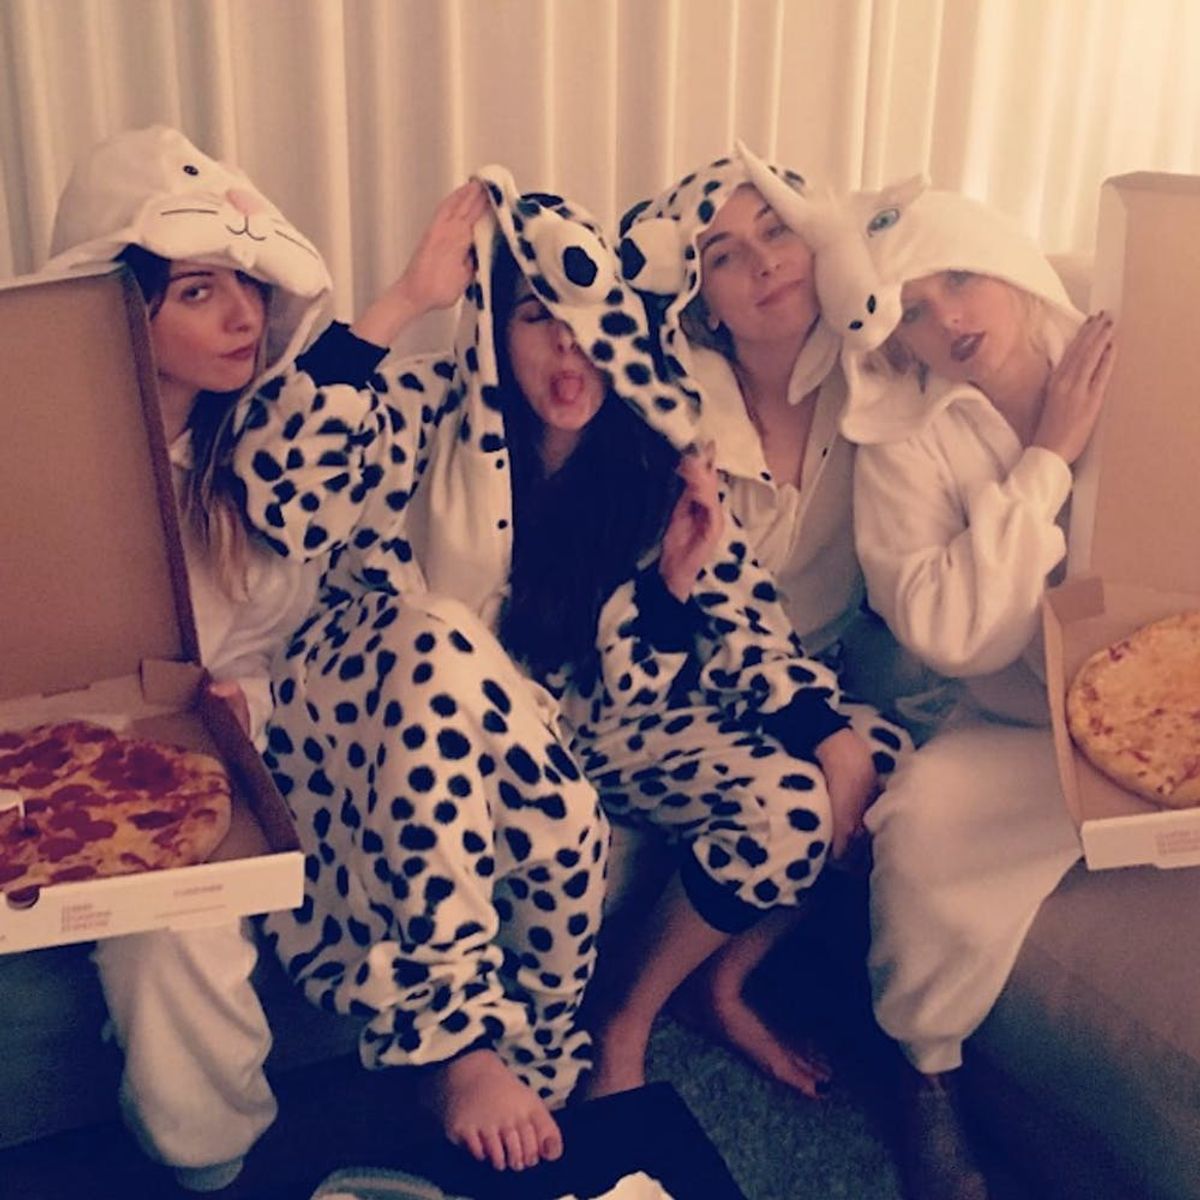 Morning Buzz! Taylor Swift’s Sleepover Had Unicorn Onesies and Pizza Because Taylor Swift + More